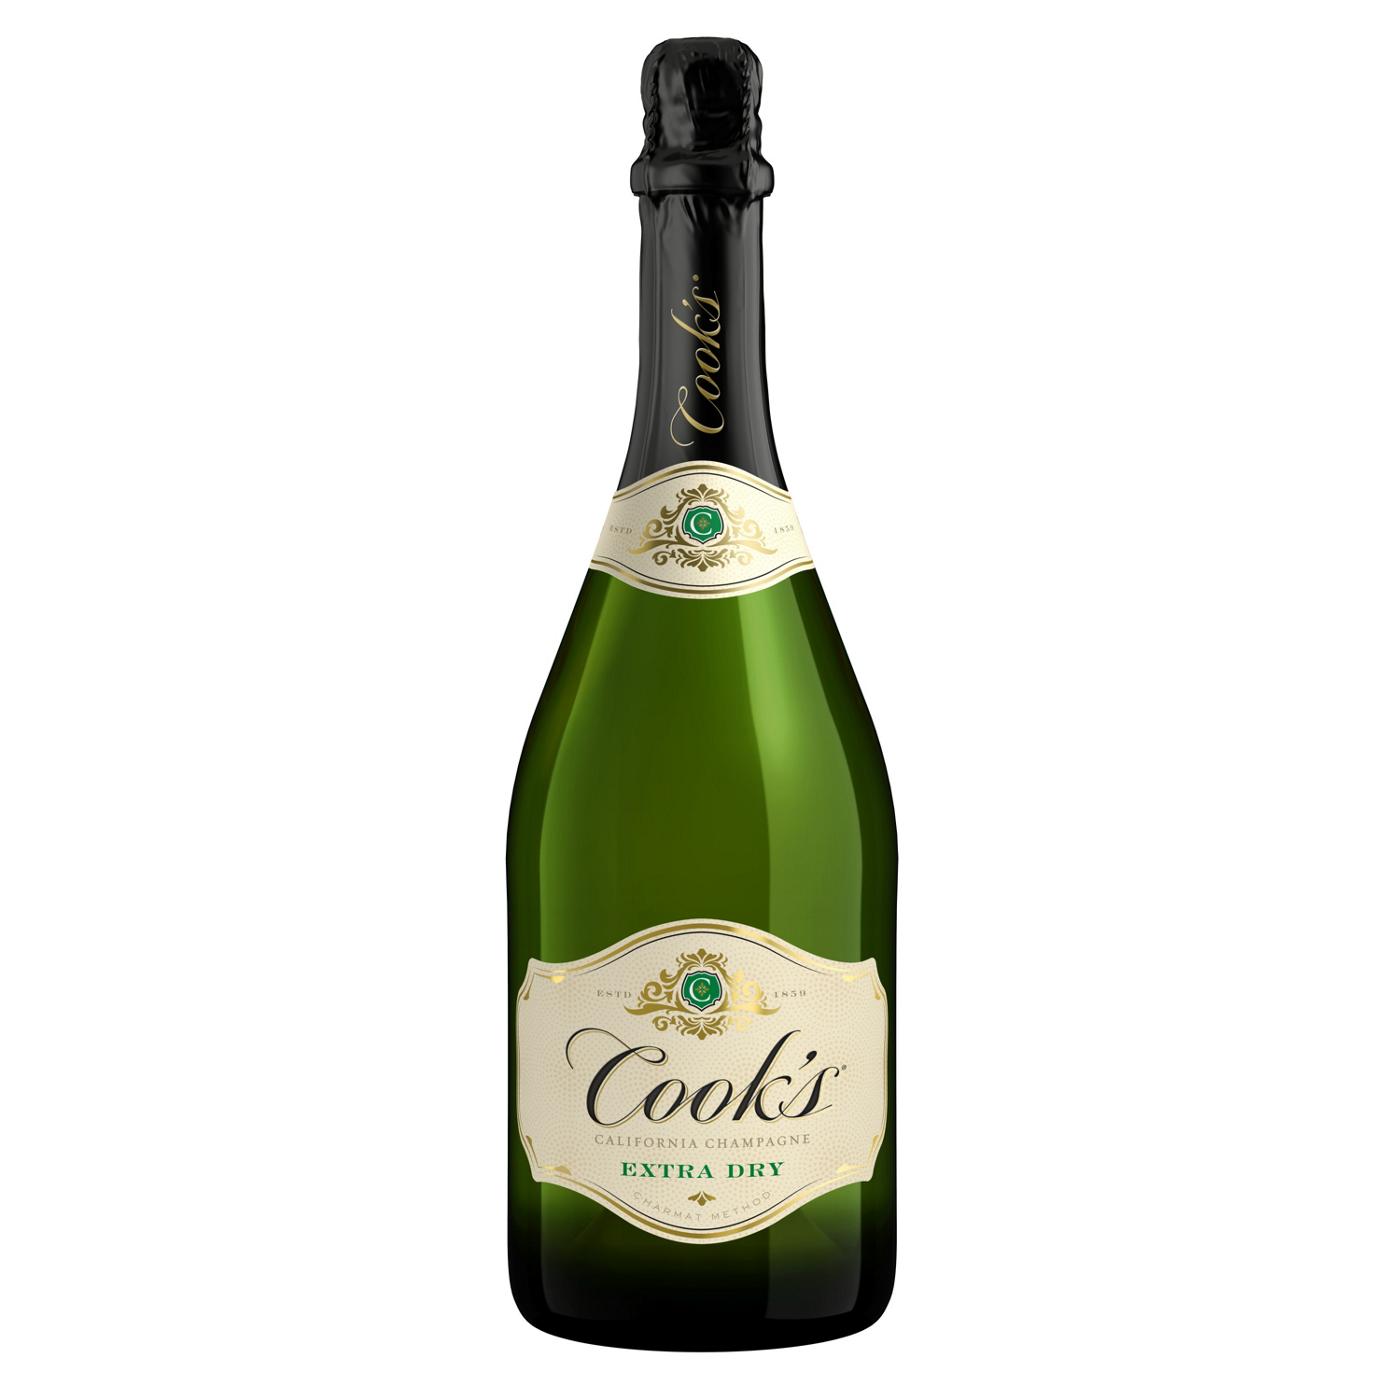 Cook's California Champagne Extra Dry White Sparkling Wine Bottle; image 1 of 6